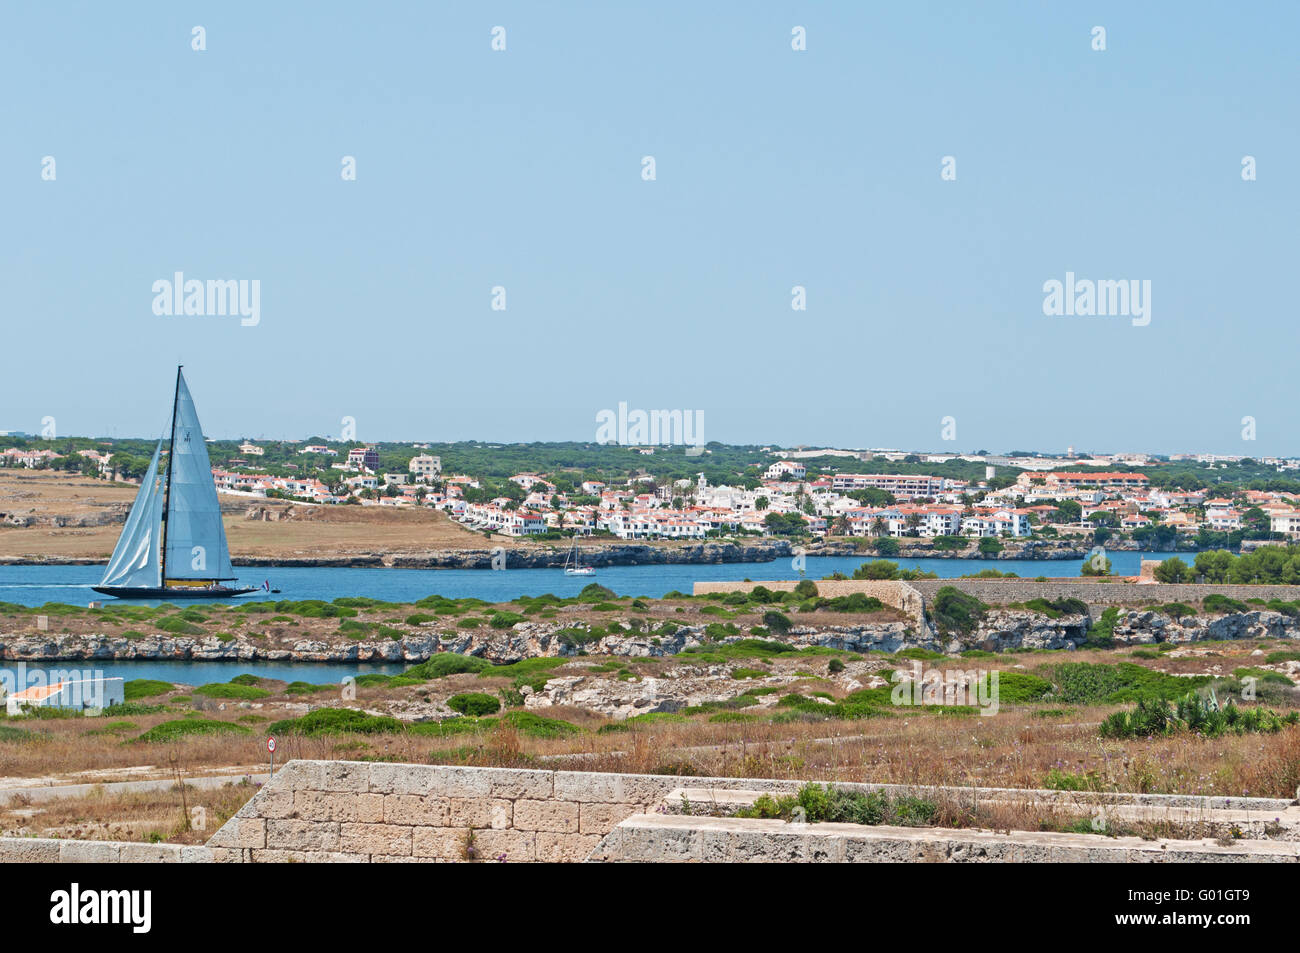 Menorca, Balearic Islands, Spain, Europe: a sailboat approaching in the port of Mahon seen from the Fortress of La Mola Stock Photo